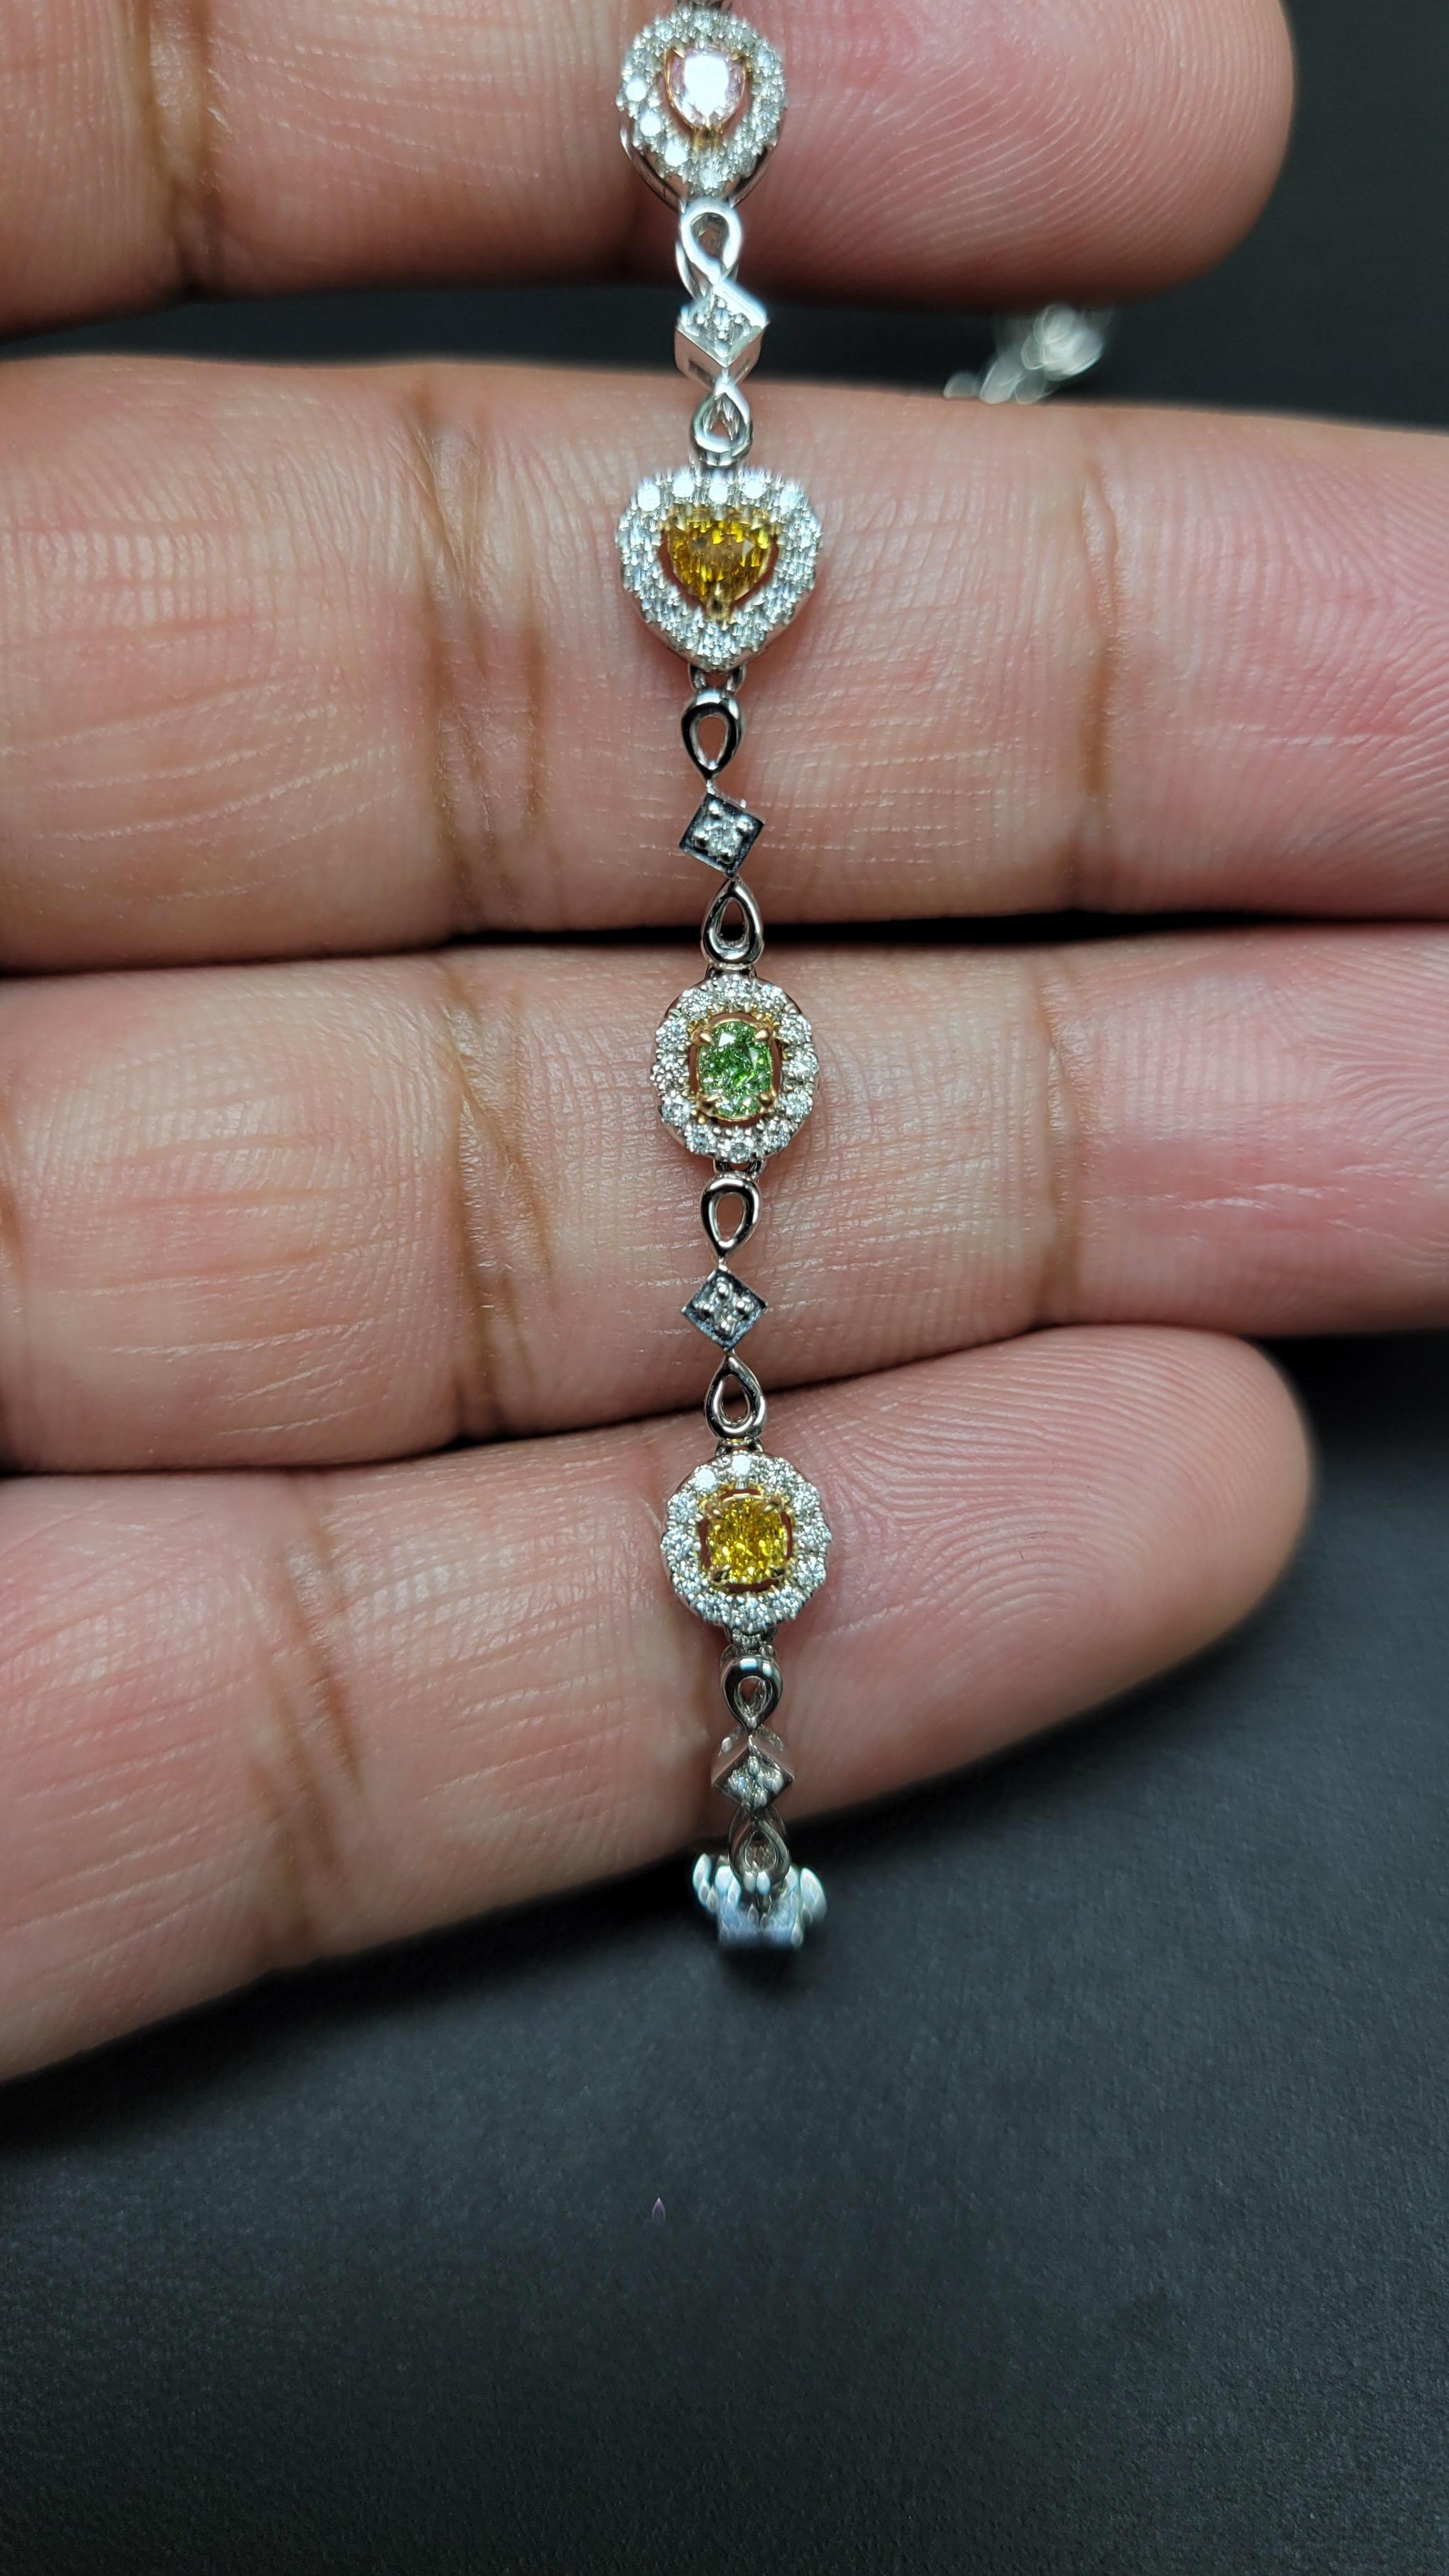 Gorgeous multi color diamond bracelet set in 7.08grams of the finest 18K/W Gold. This gorgeous bracelet consists of Pink, Yellow, and Green diamonds which are mostly Oval, some Pear shapes and Hearts. 

Lot #: 04186

18KW/P Gold: 7.08g

Fancy Color